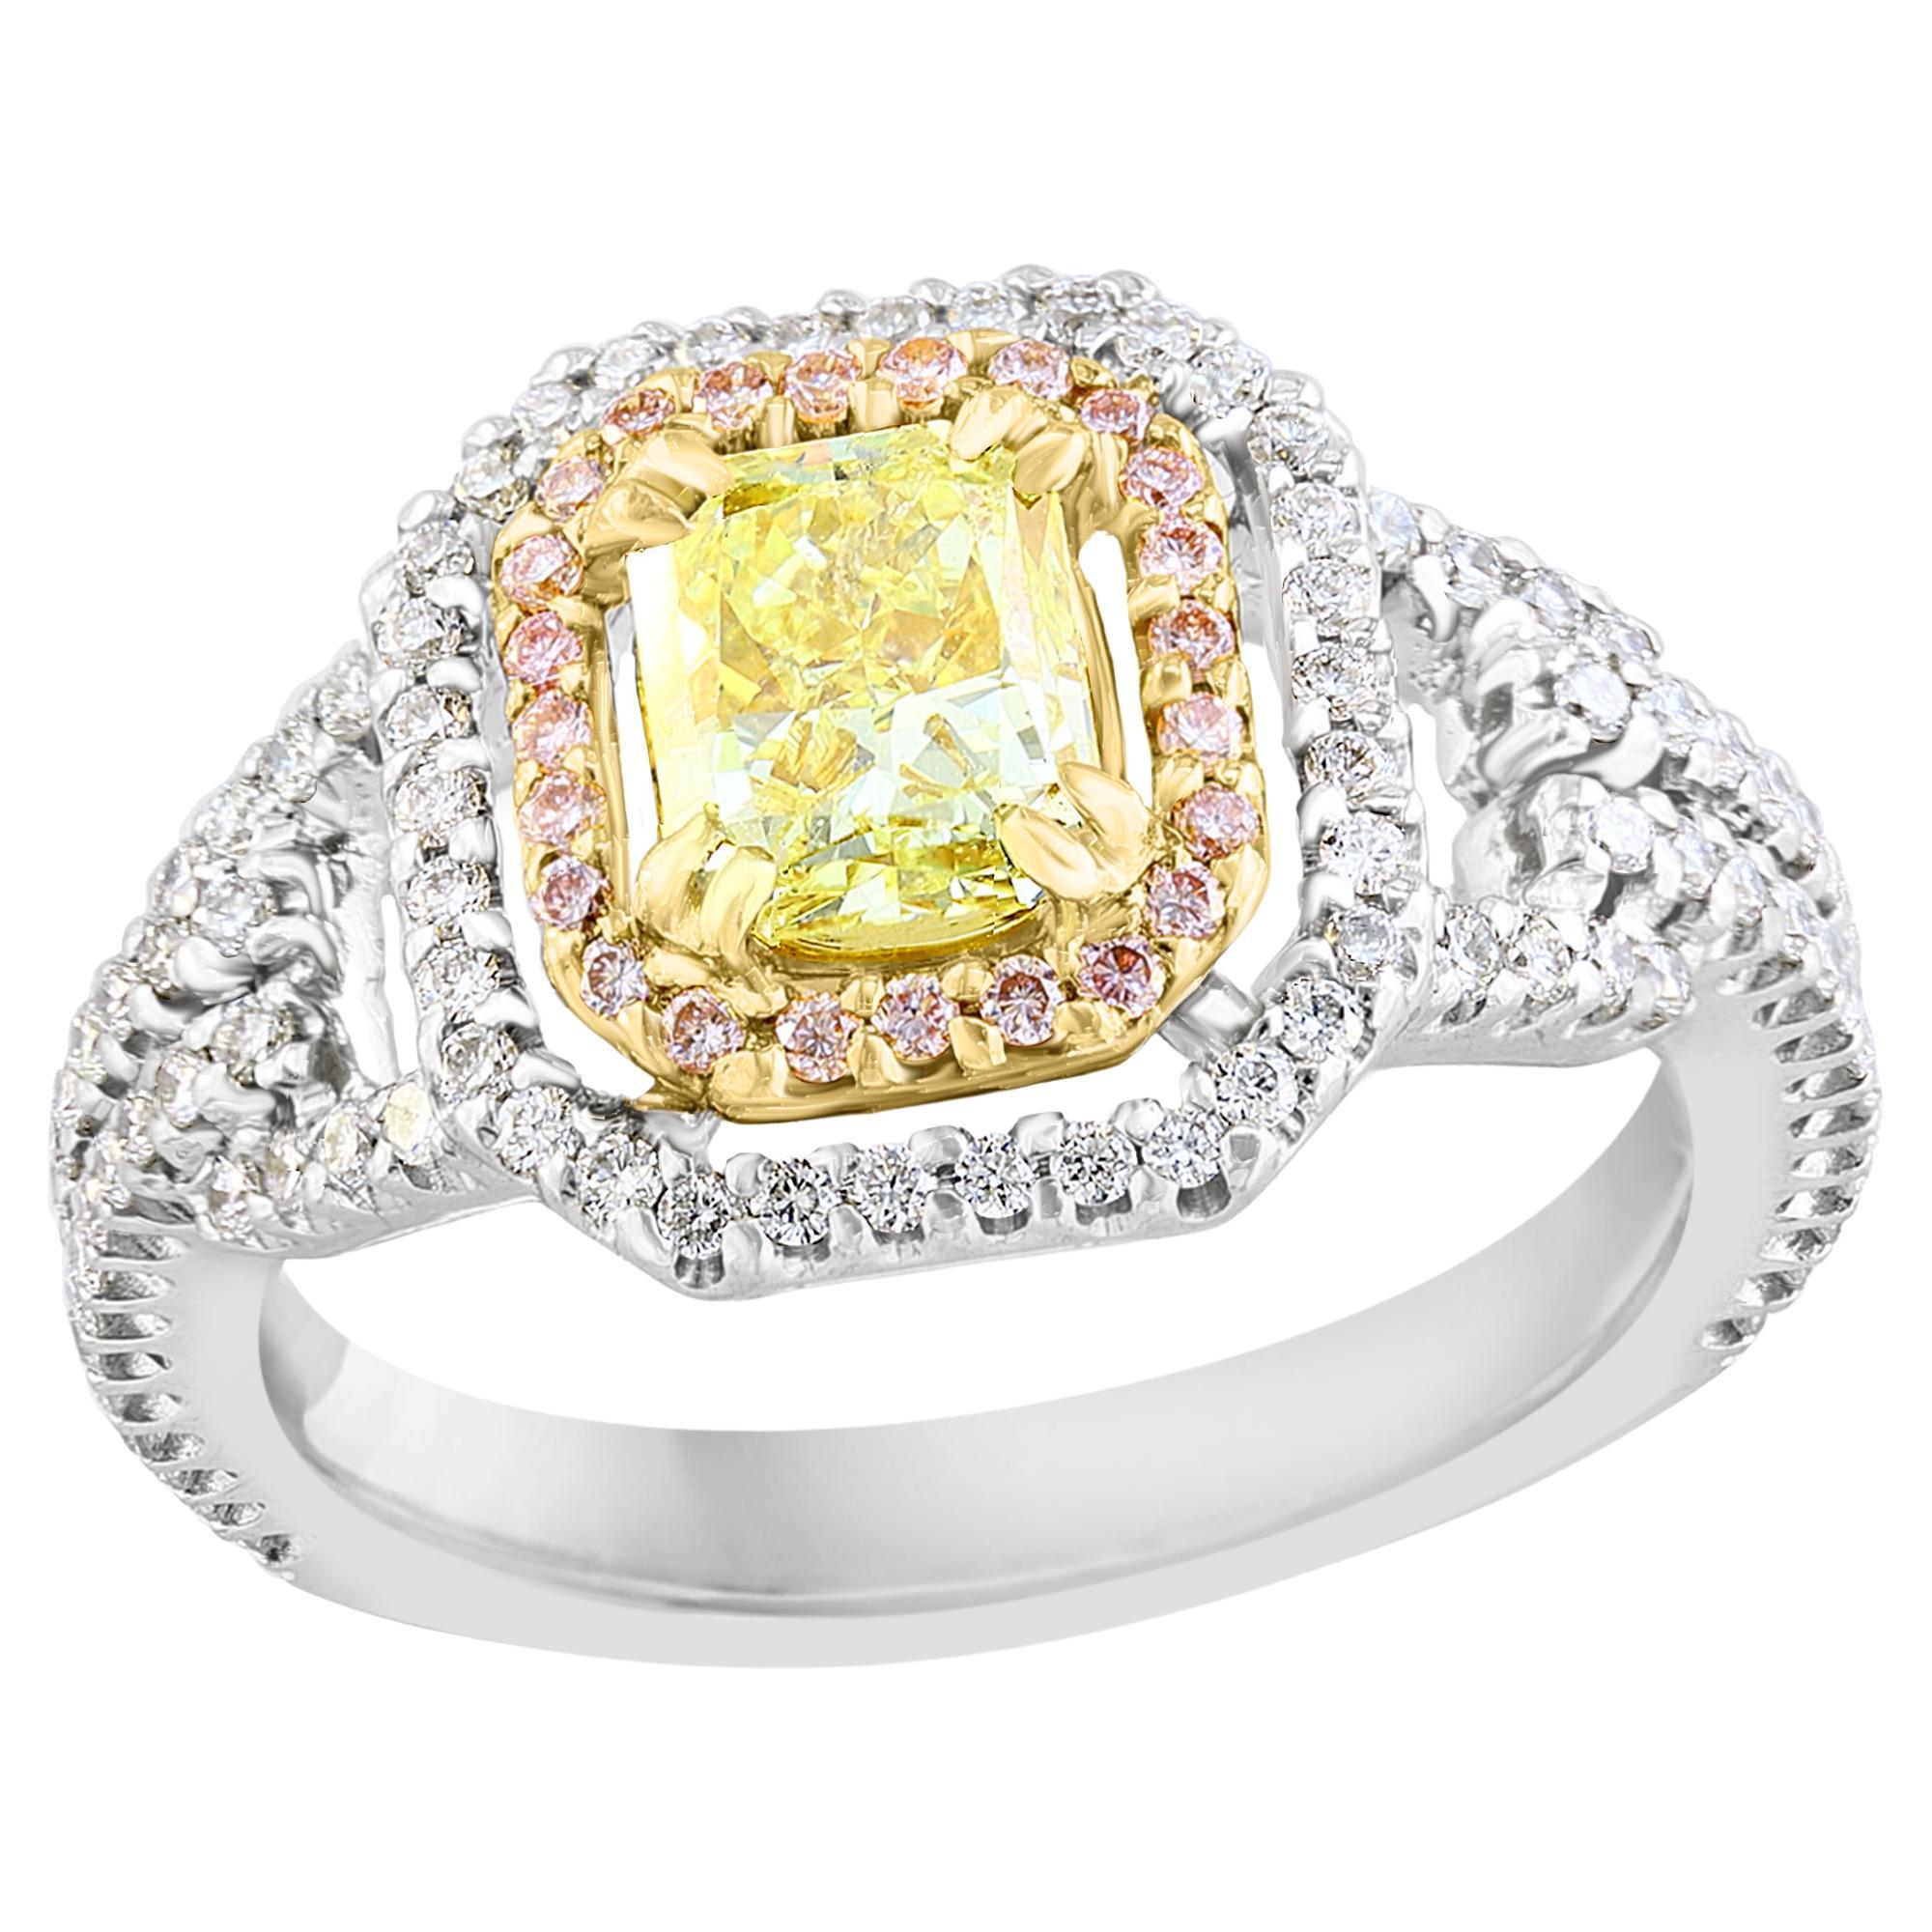 1 Carat Emerald Cut Yellow Diamond Ring in 18k Mix Gold For Sale